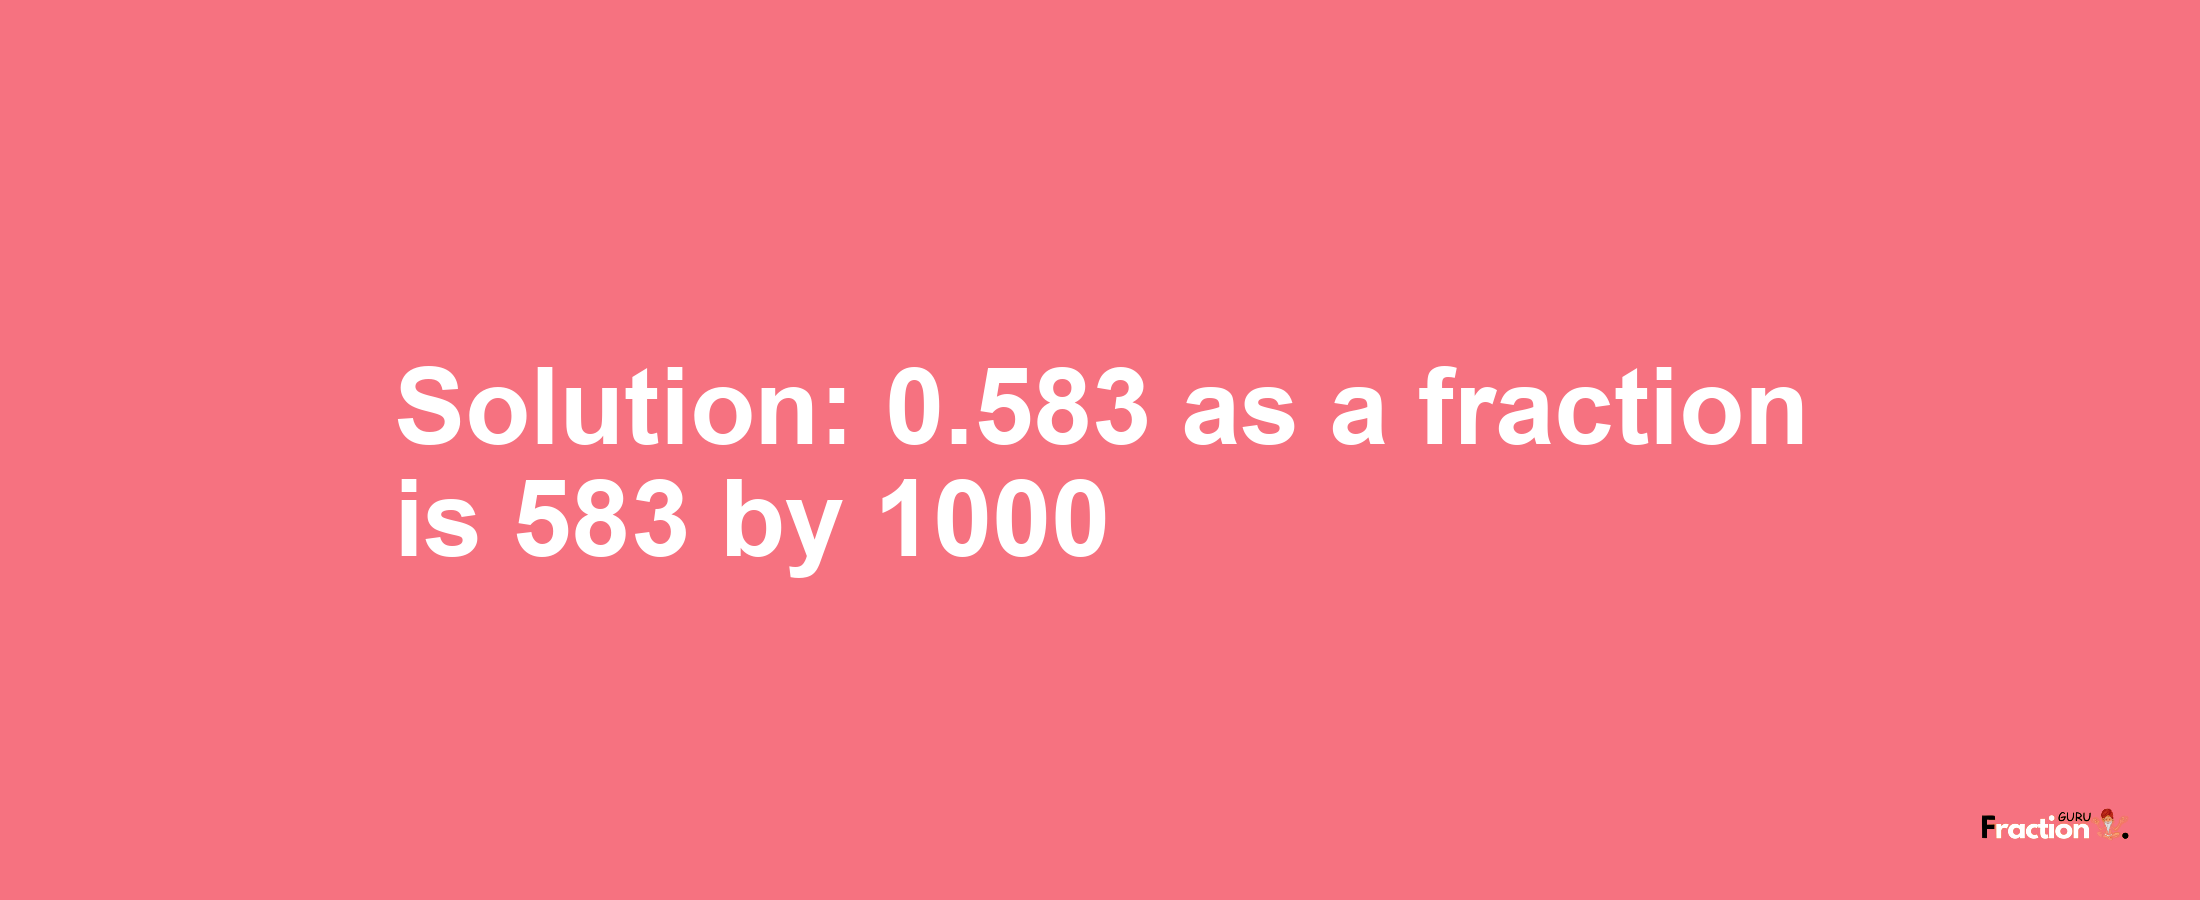 Solution:0.583 as a fraction is 583/1000